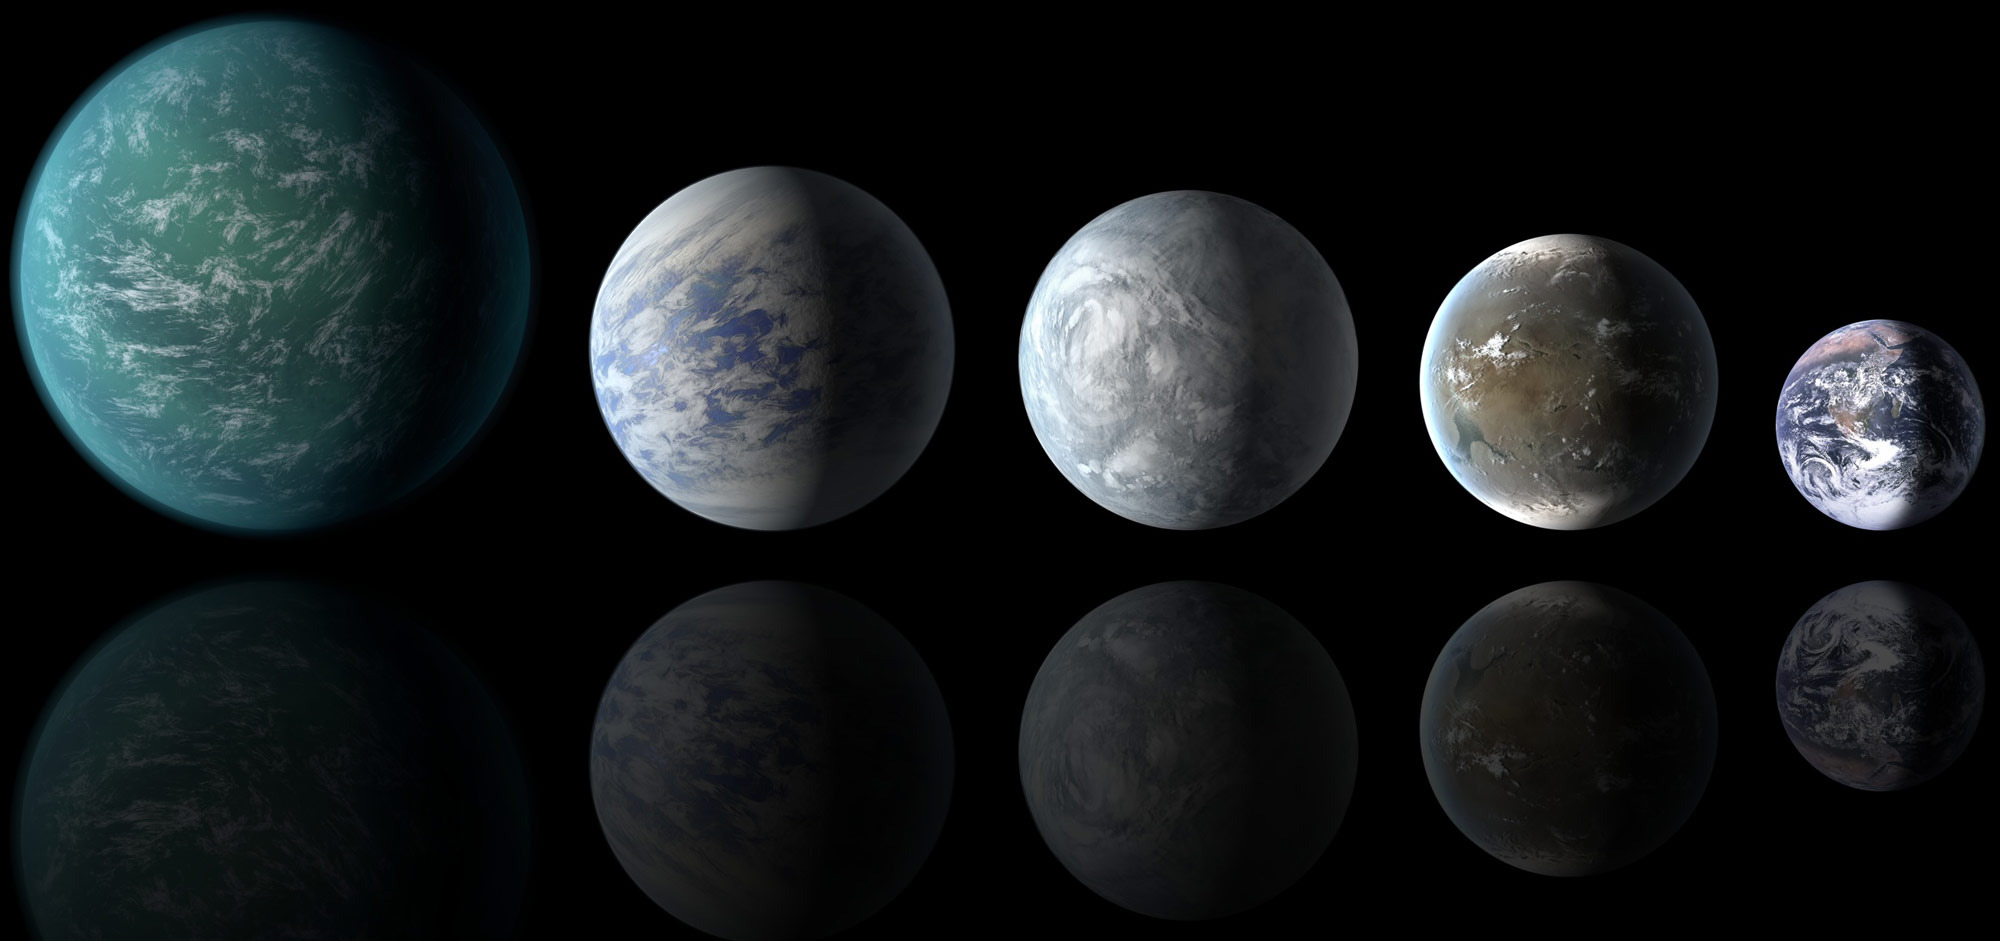 Kepler Mission Discovers Two New Planetary Systems with ‘Habitable Zone ...